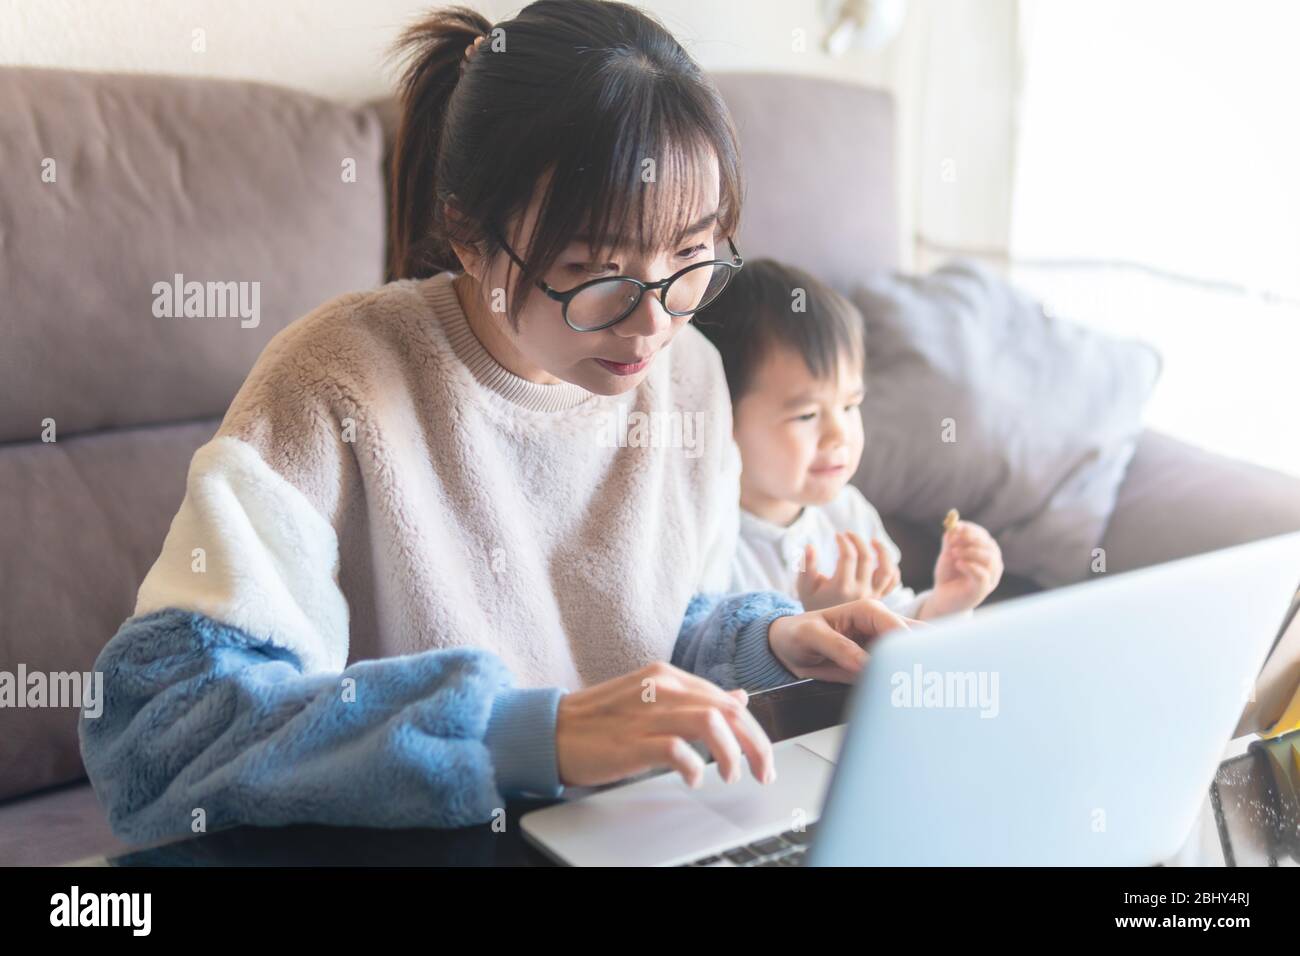 Young Asian mother working from home on computer. Kid watching cartoon on a tablet while mom work on laptop during the coronavirus pandemic lockdown Stock Photo